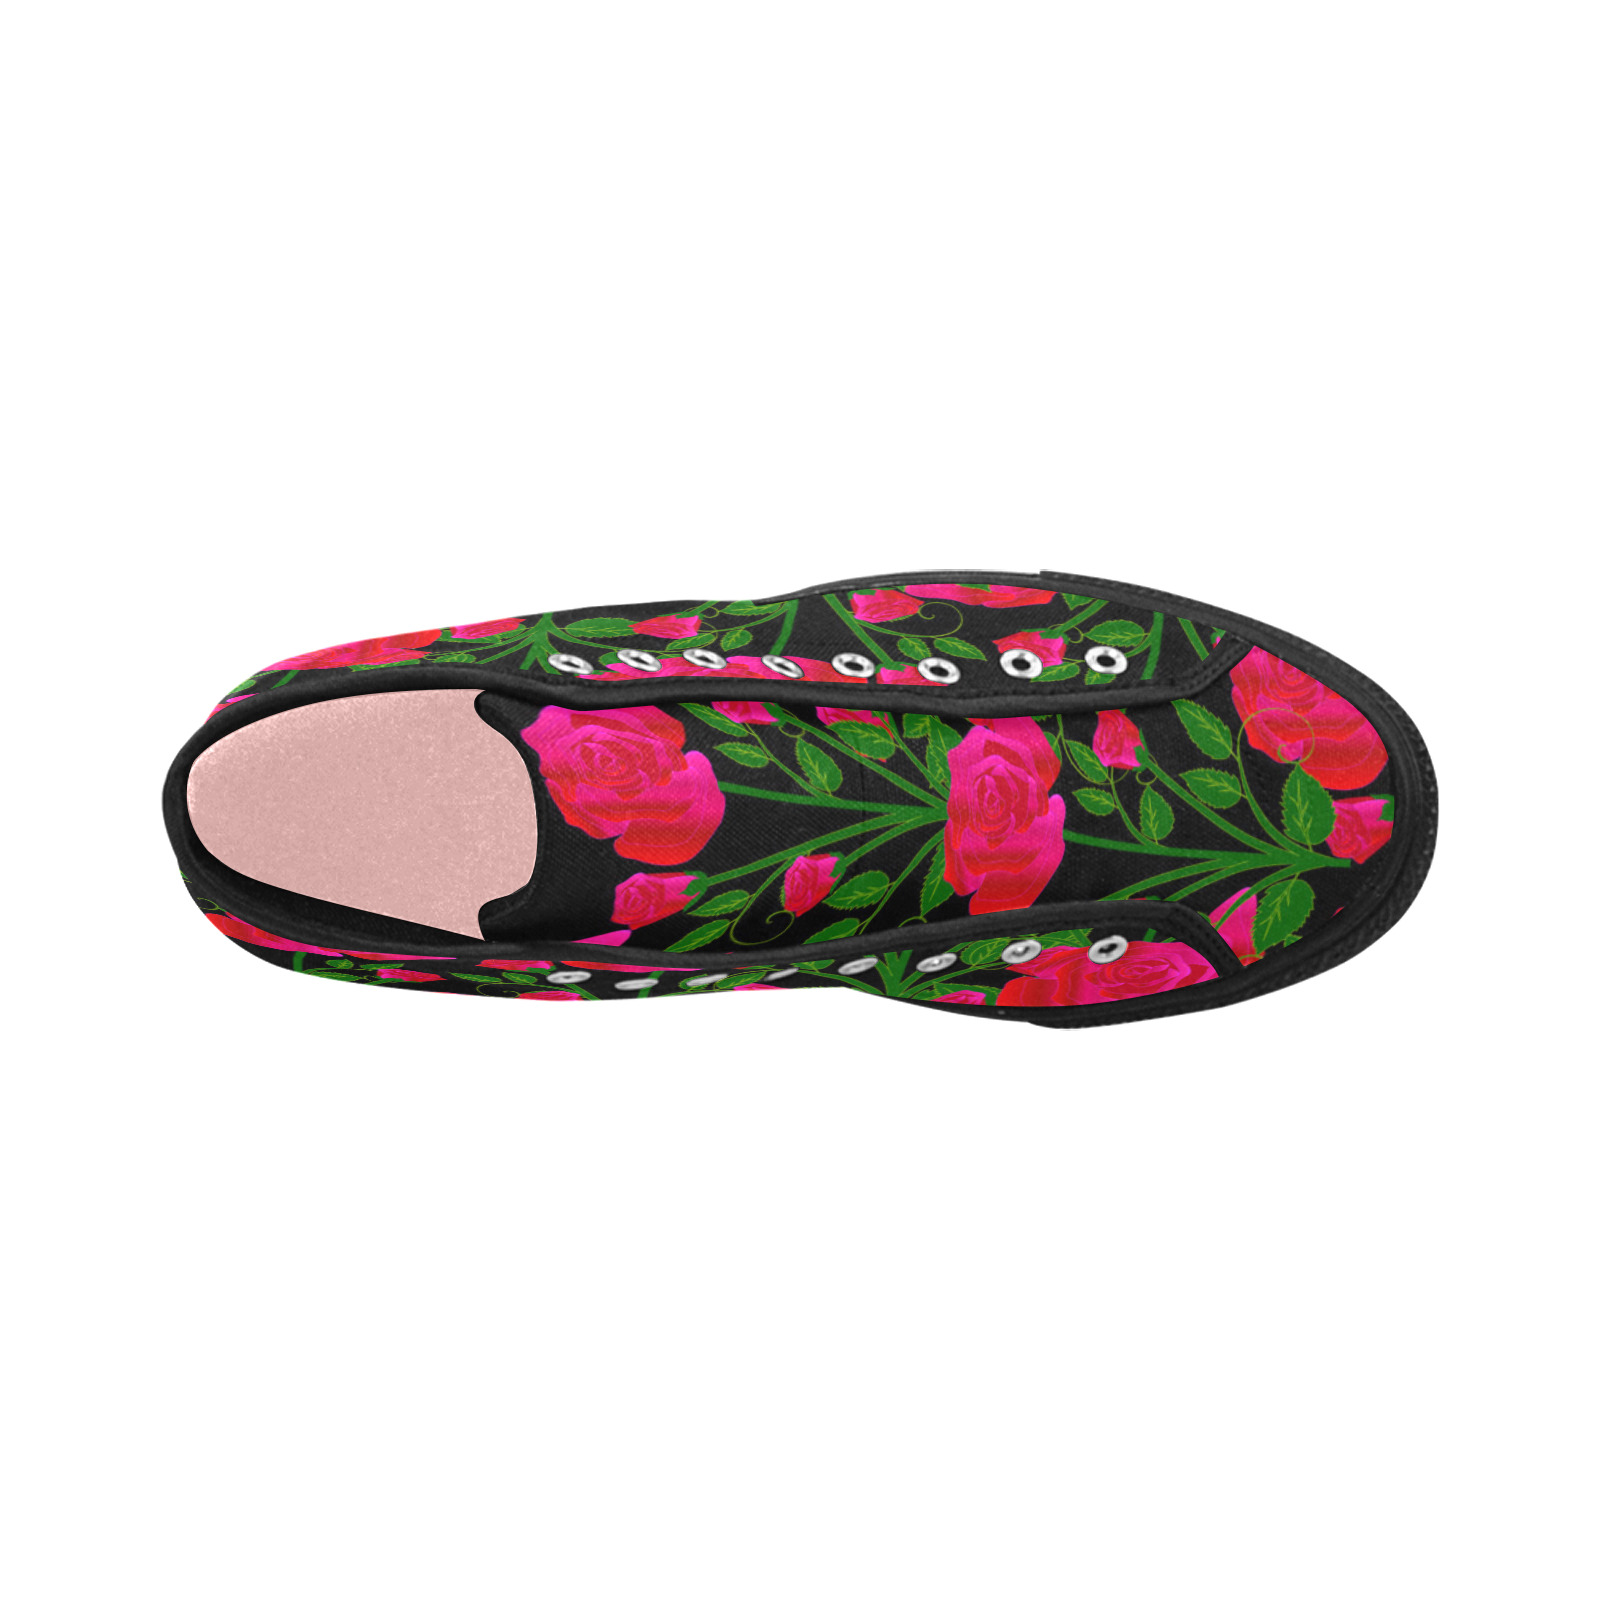 roses at night Vancouver H Women's Canvas Shoes (1013-1)